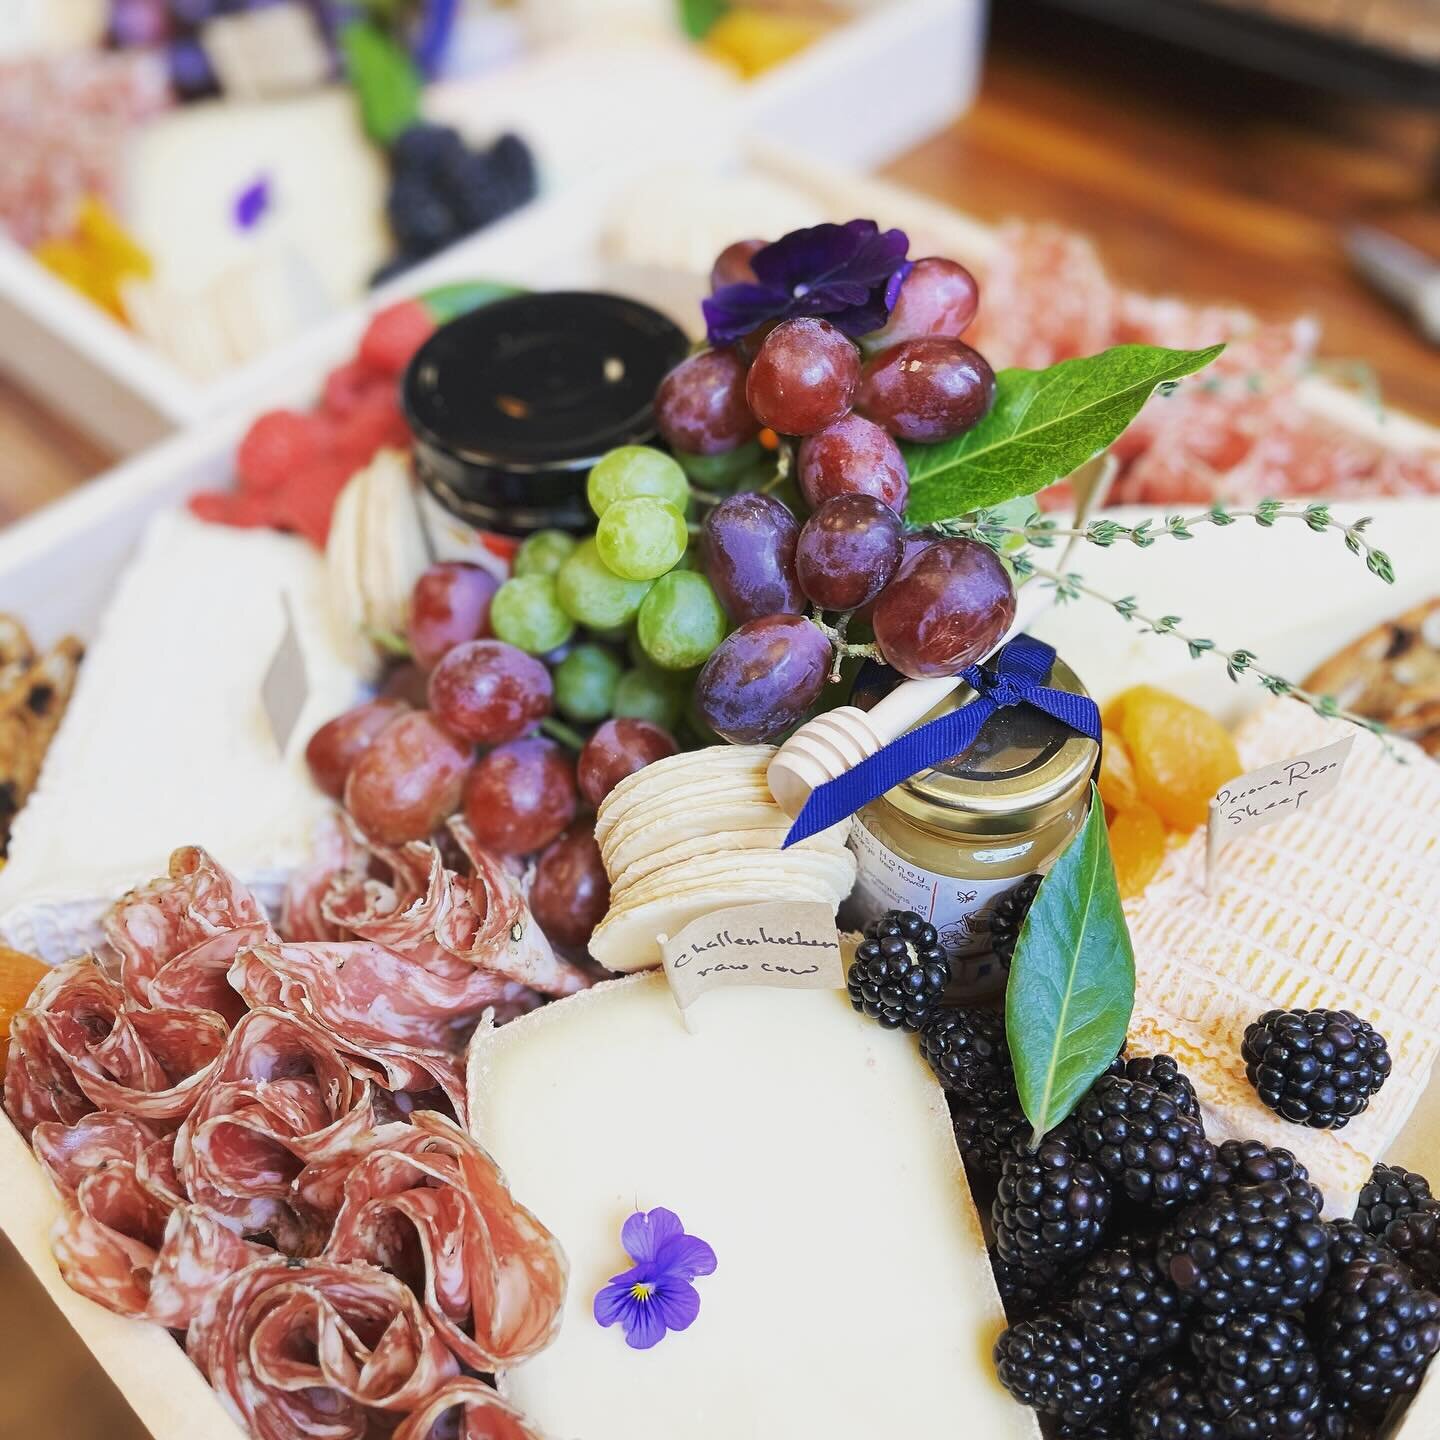 Are you hosting an Easter get together? A beautiful and delicious Scott &amp; Joe cheese &amp; charcuterie board full of springtime favorites is what you truly need.

We&rsquo;re talking boards with goat cheeses full of floral and lemony notes, aged 